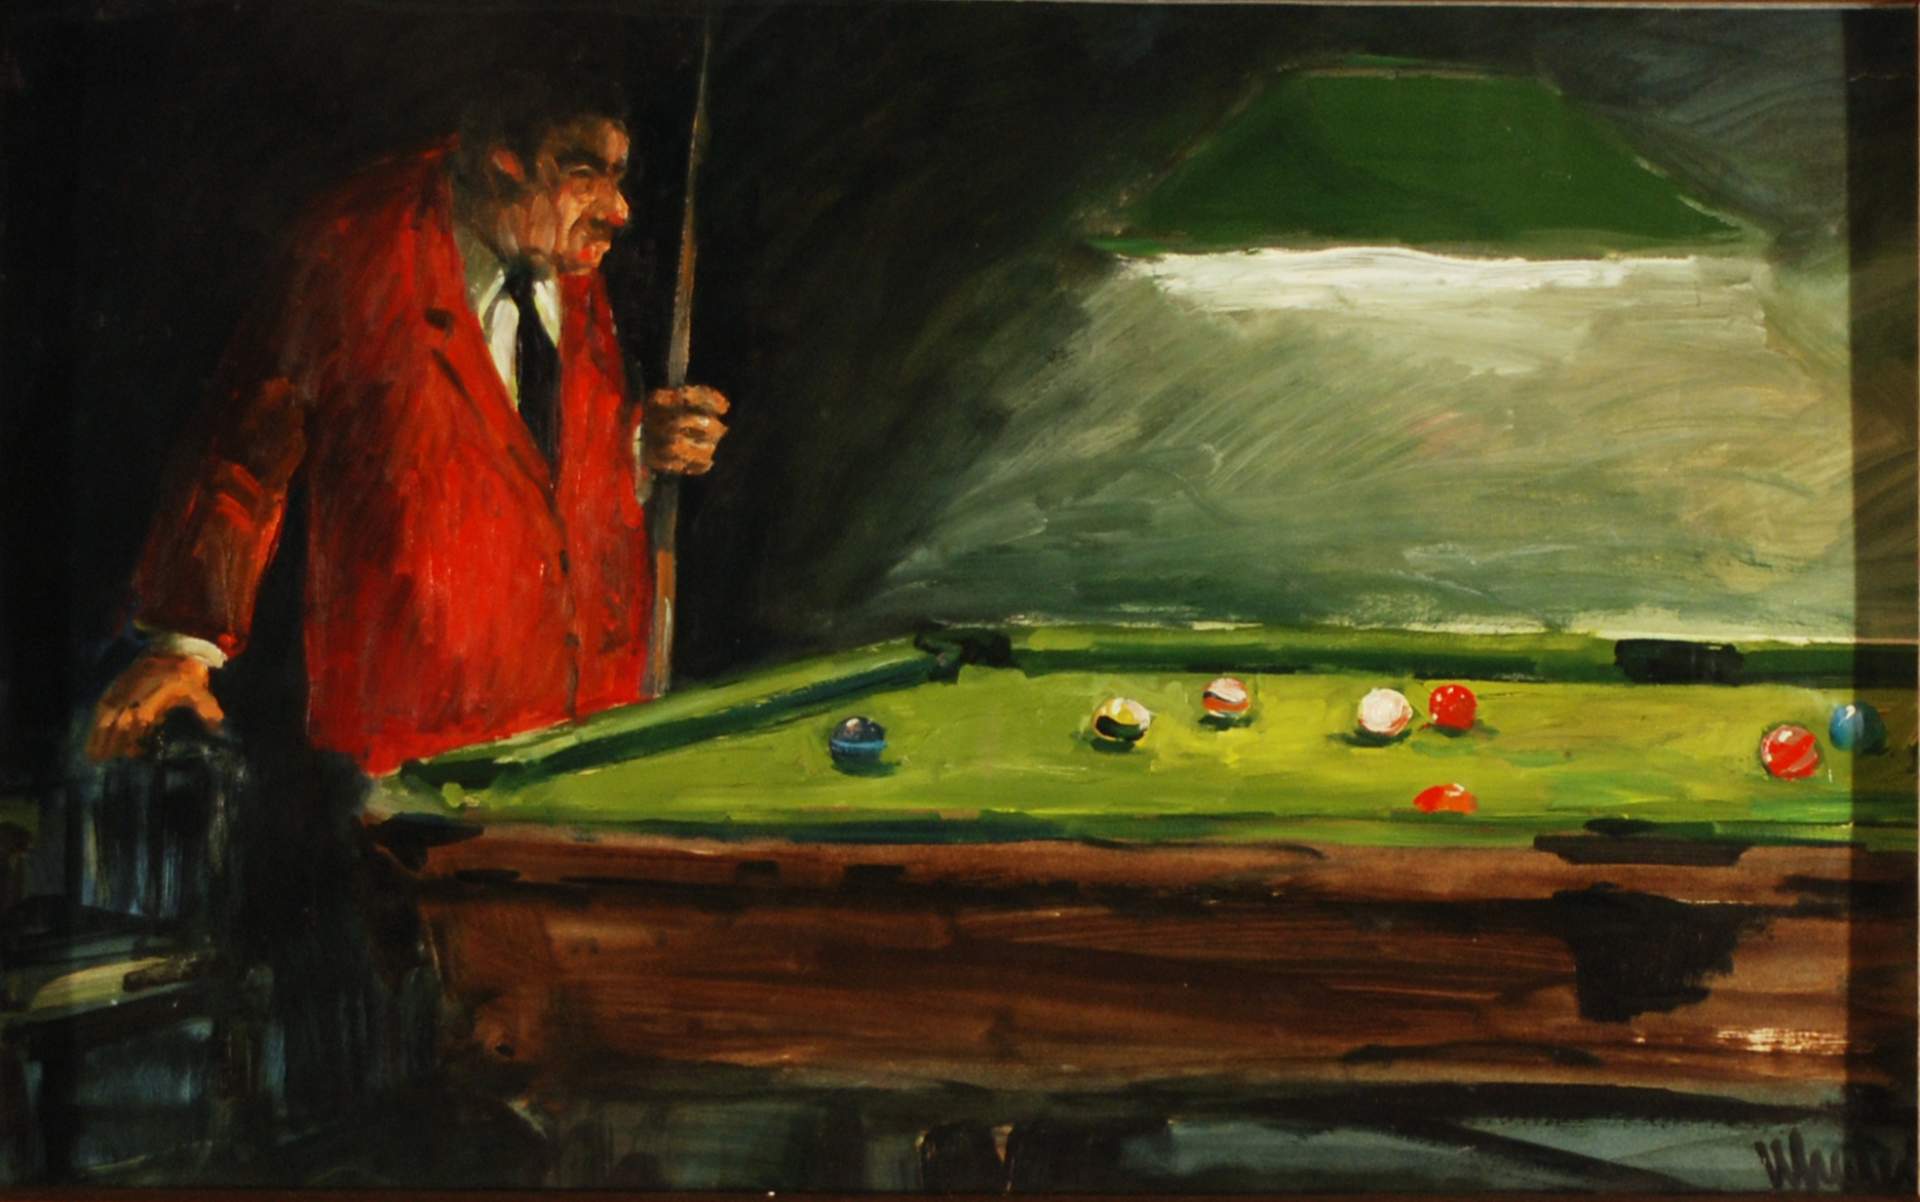 Pool Player in Red Jacket